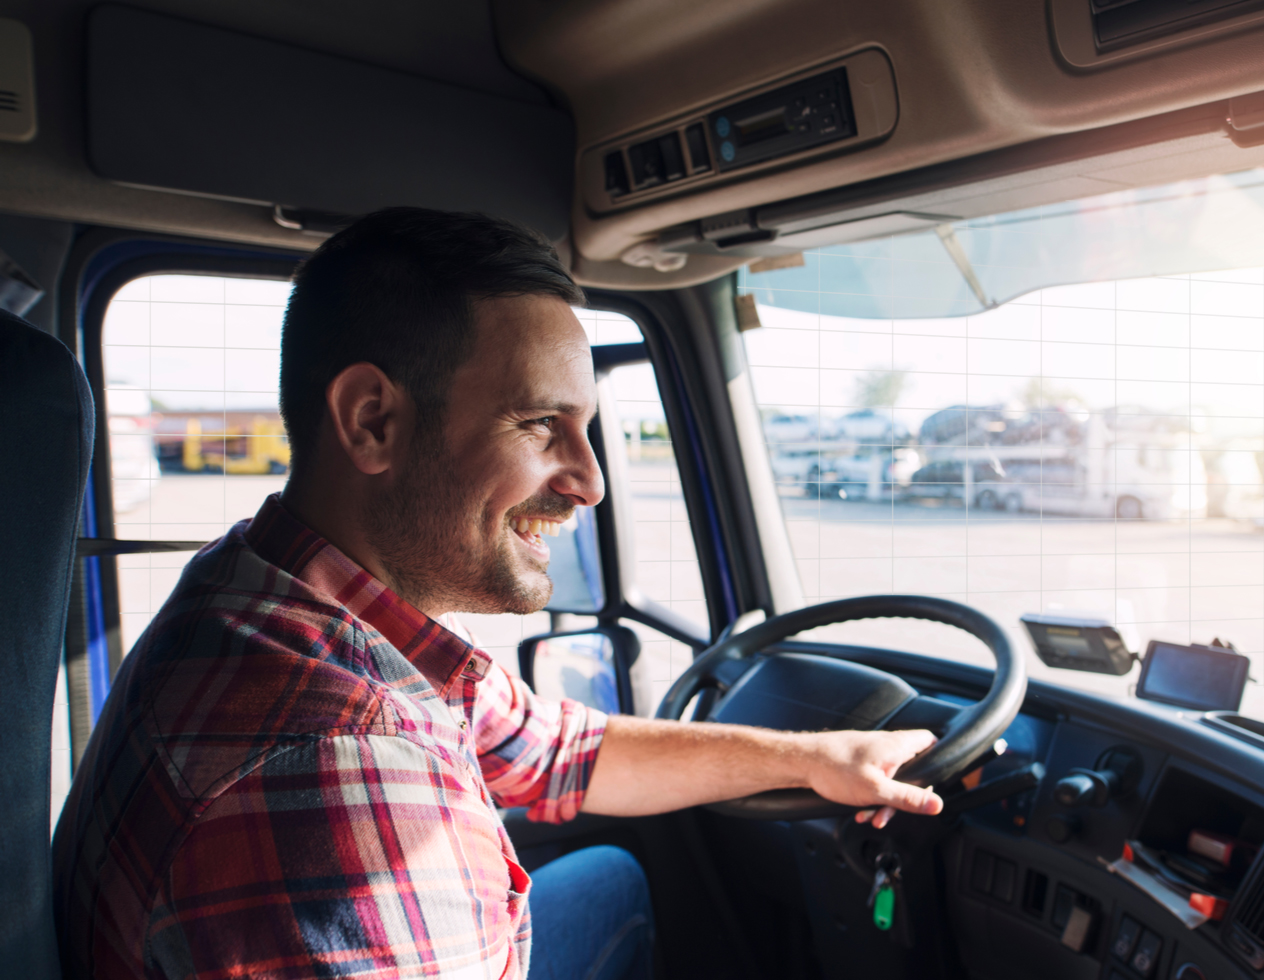 Stylized image of a man driving a truck.